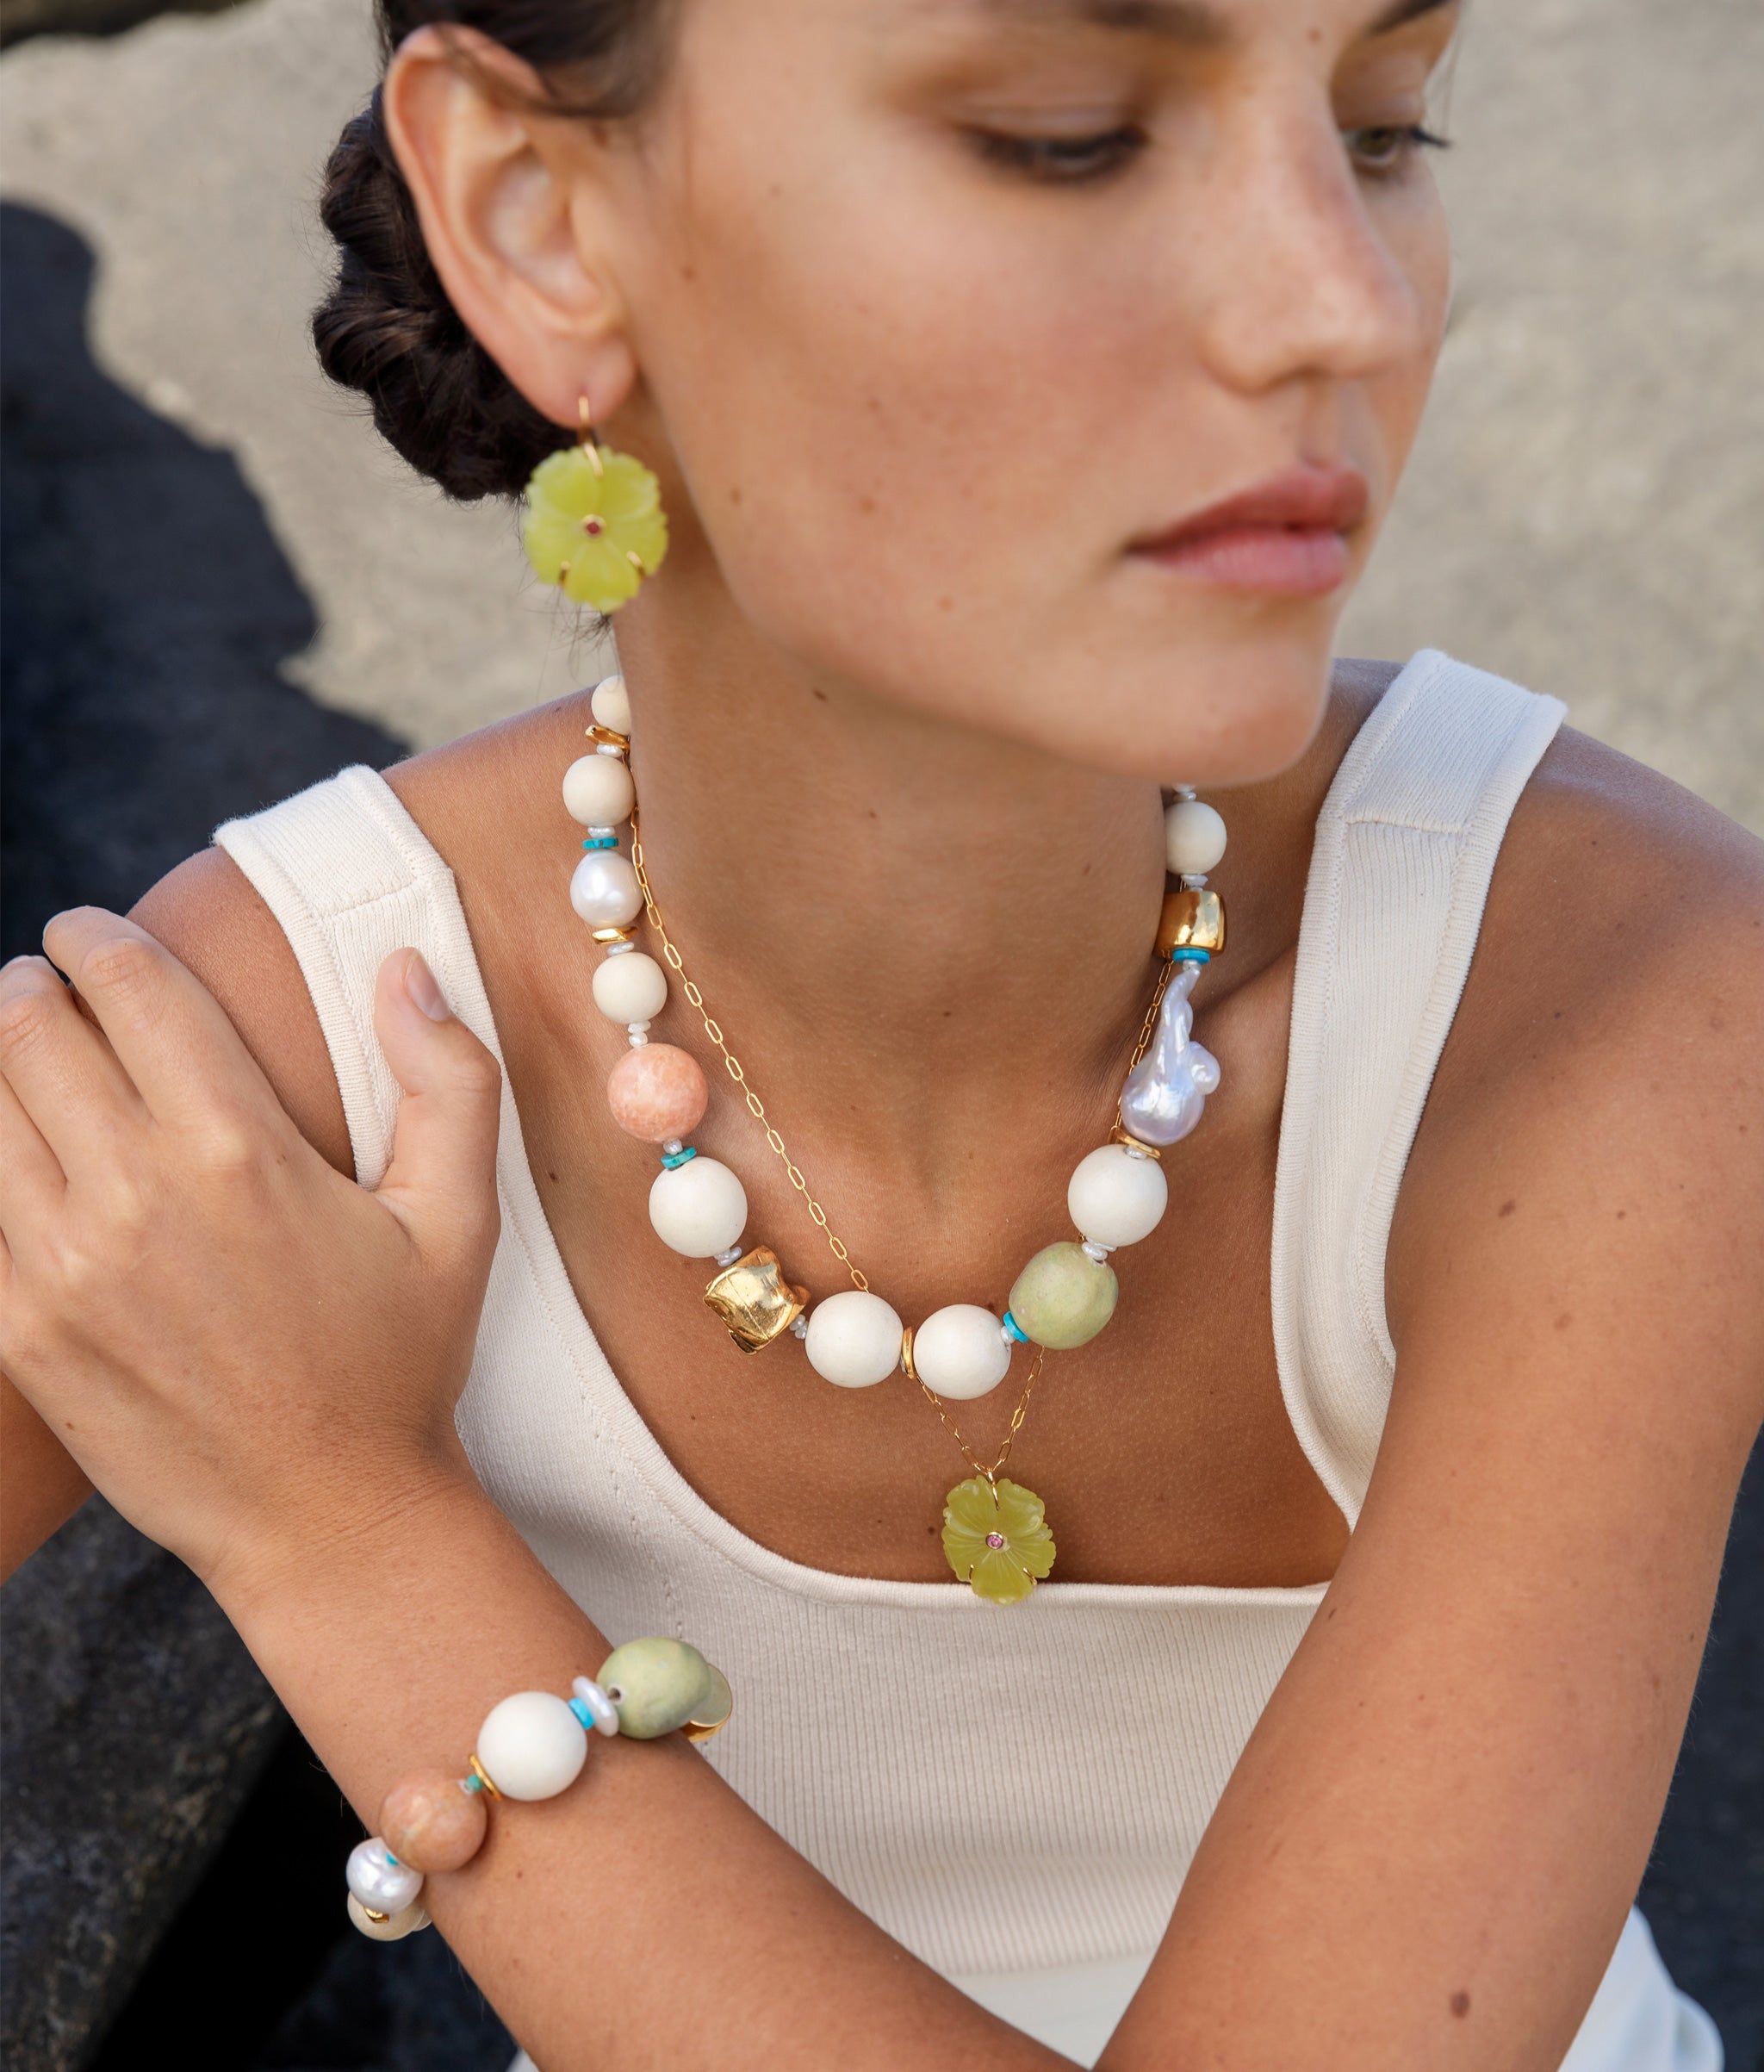  Close-up of model wearing New Bloom Earrings and Necklace in Canary paired with Andros Necklace and Bracelet.